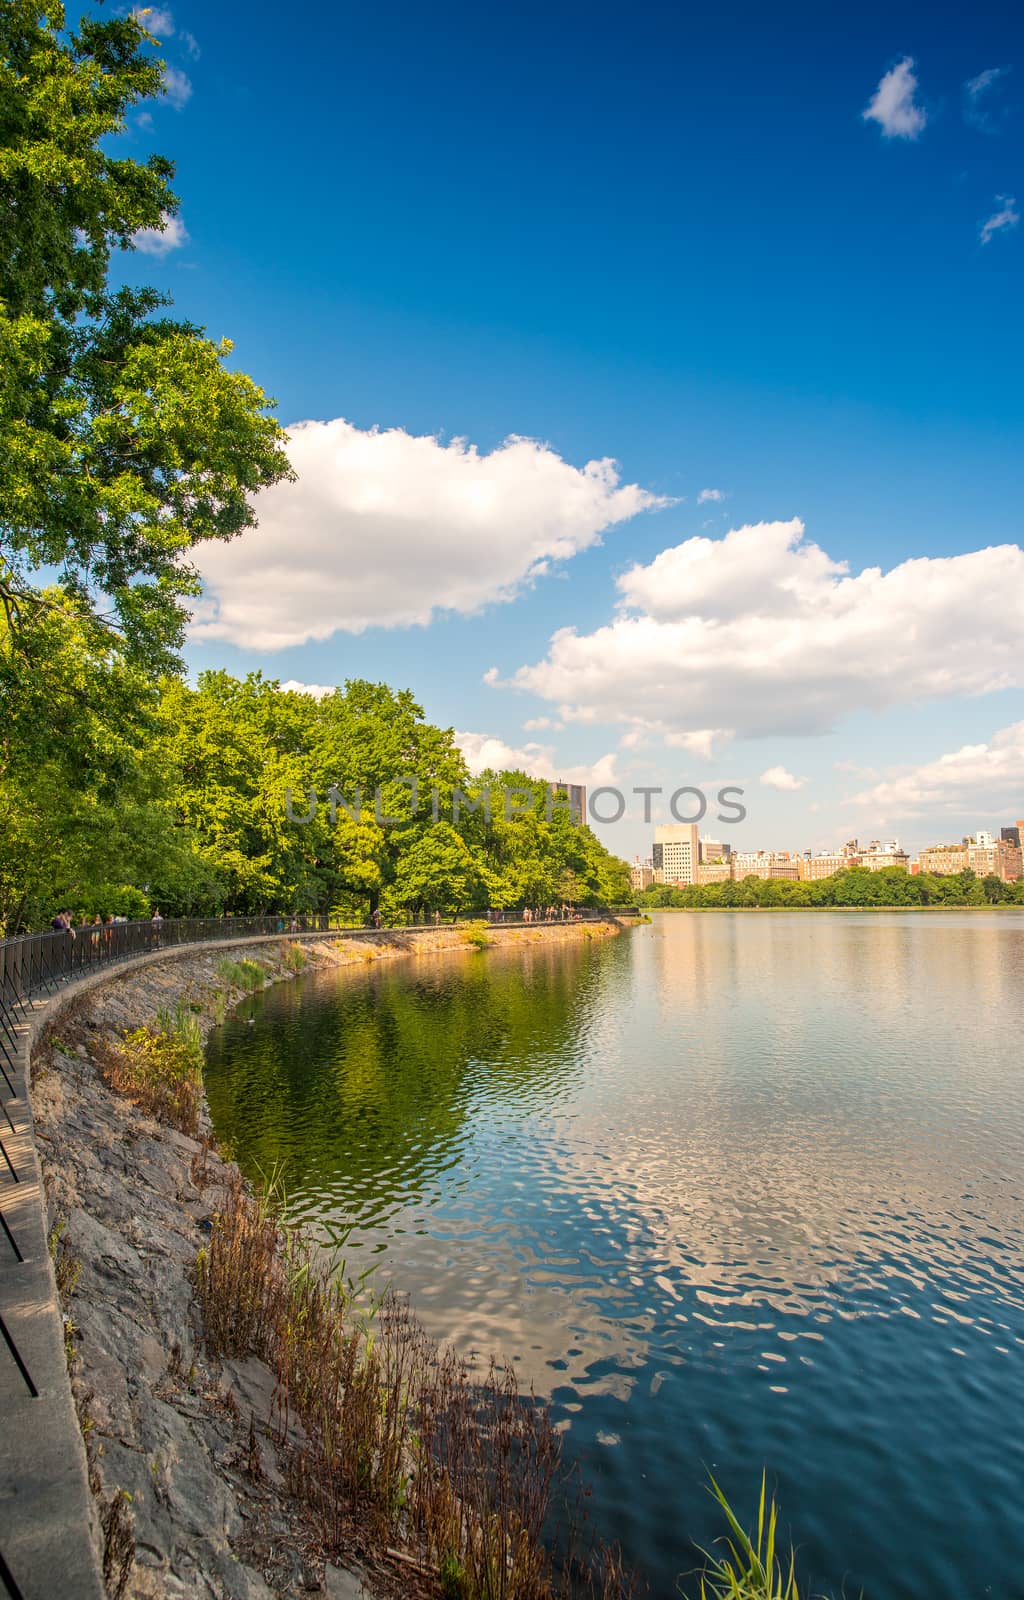 Beautiful colors of Central Park with lake reflections at dusk - New York City.